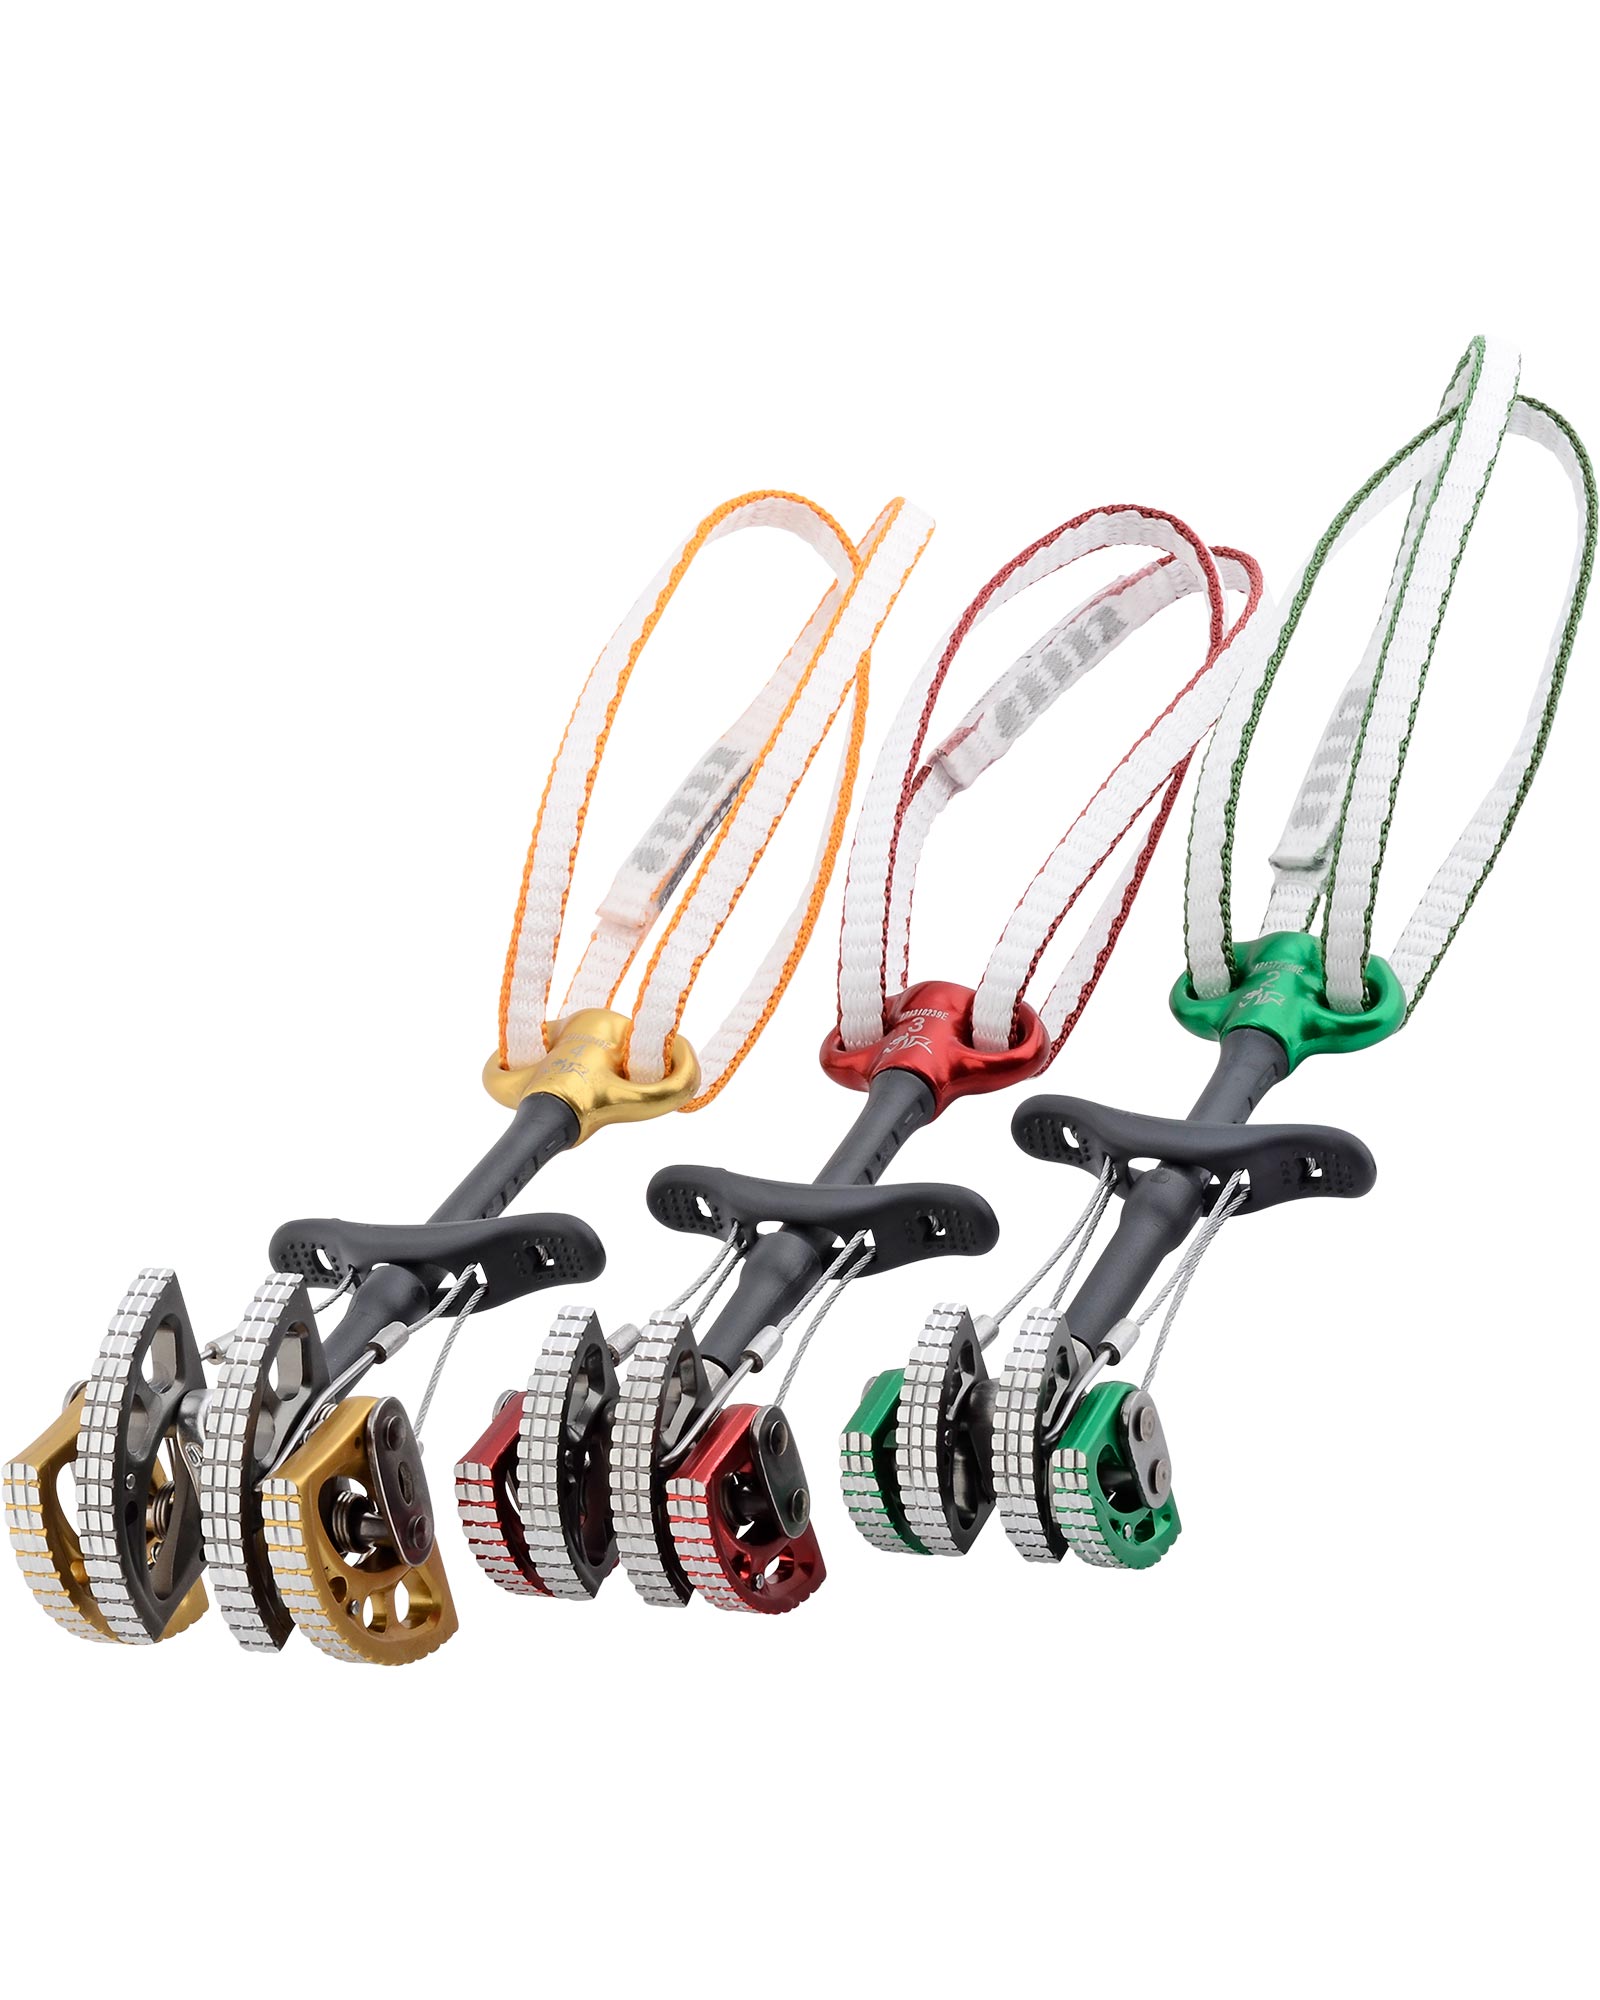 DMM Dragon 2 Cam Set Sizes 2, 3, 4 Assorted/Mixed